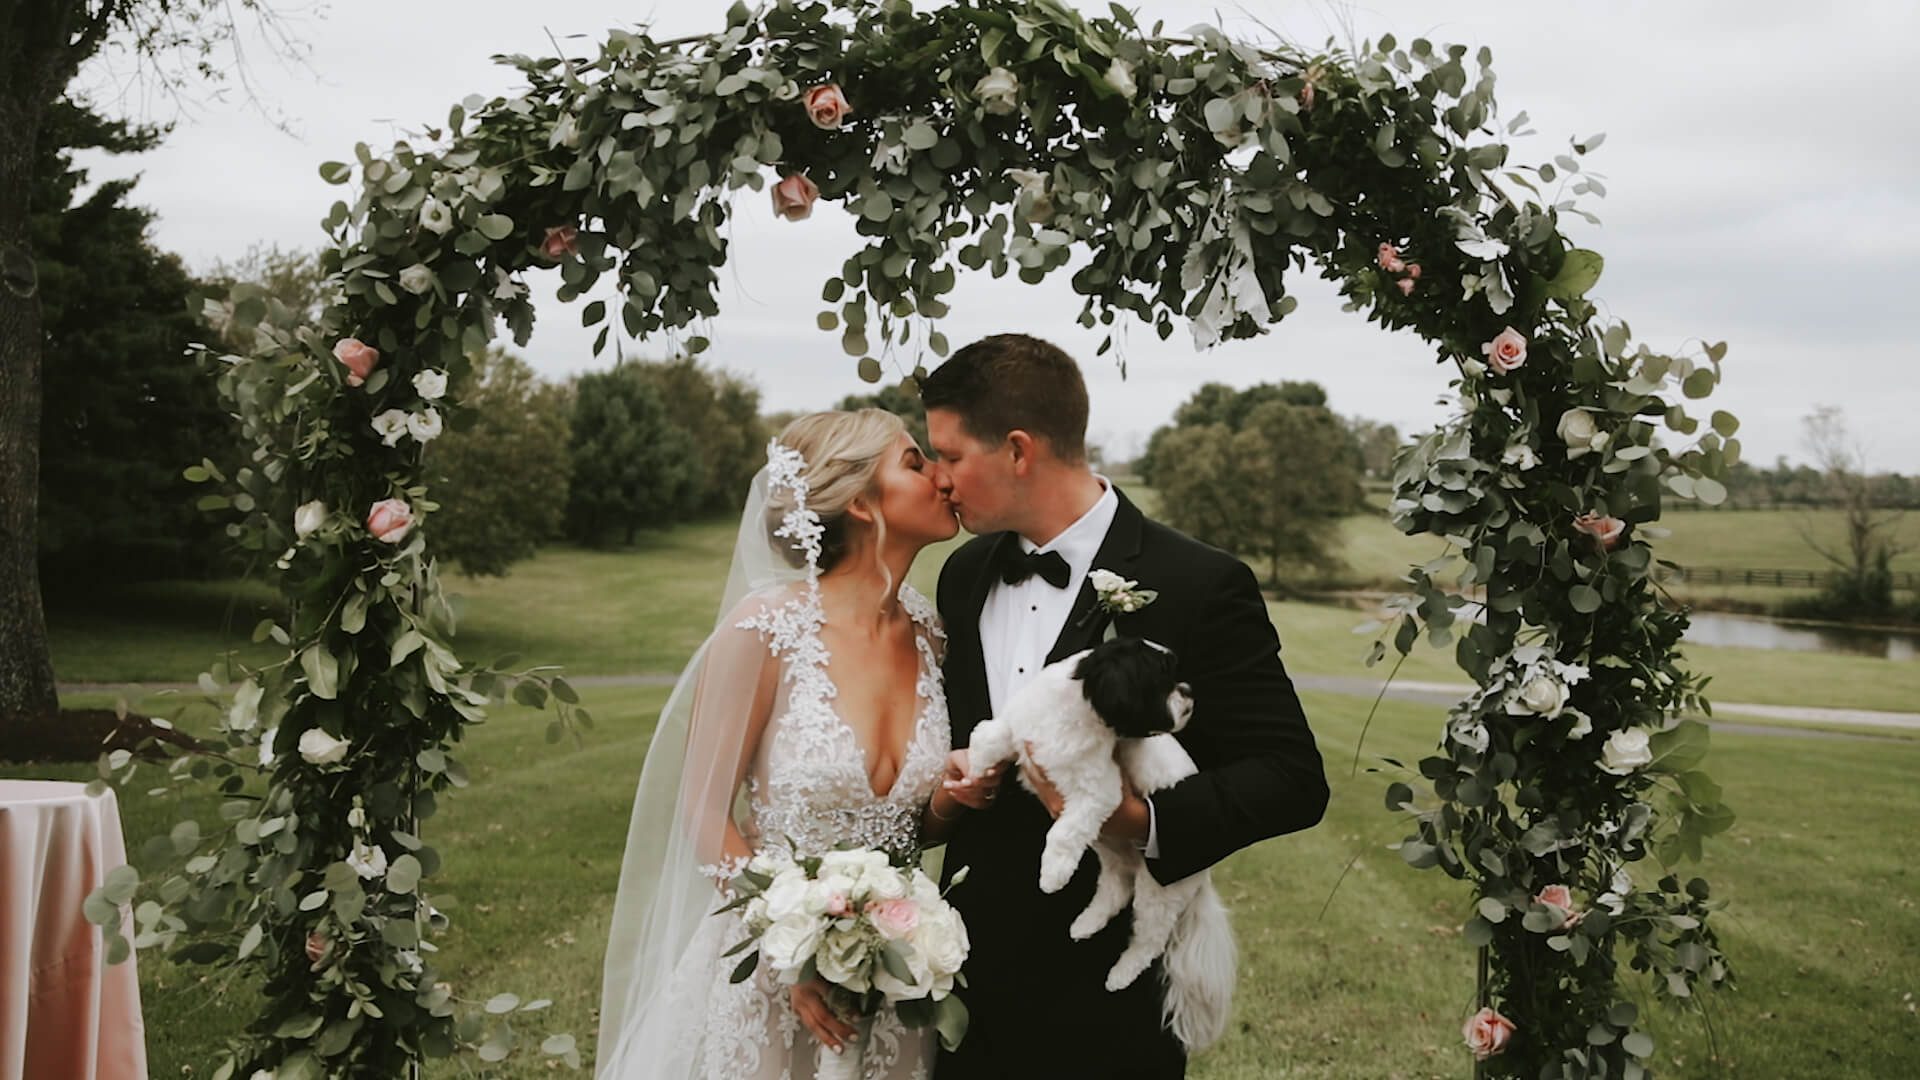 Beautiful wedding video from the Glenlary in Lexington, Kentucky with Brett and Lexy.